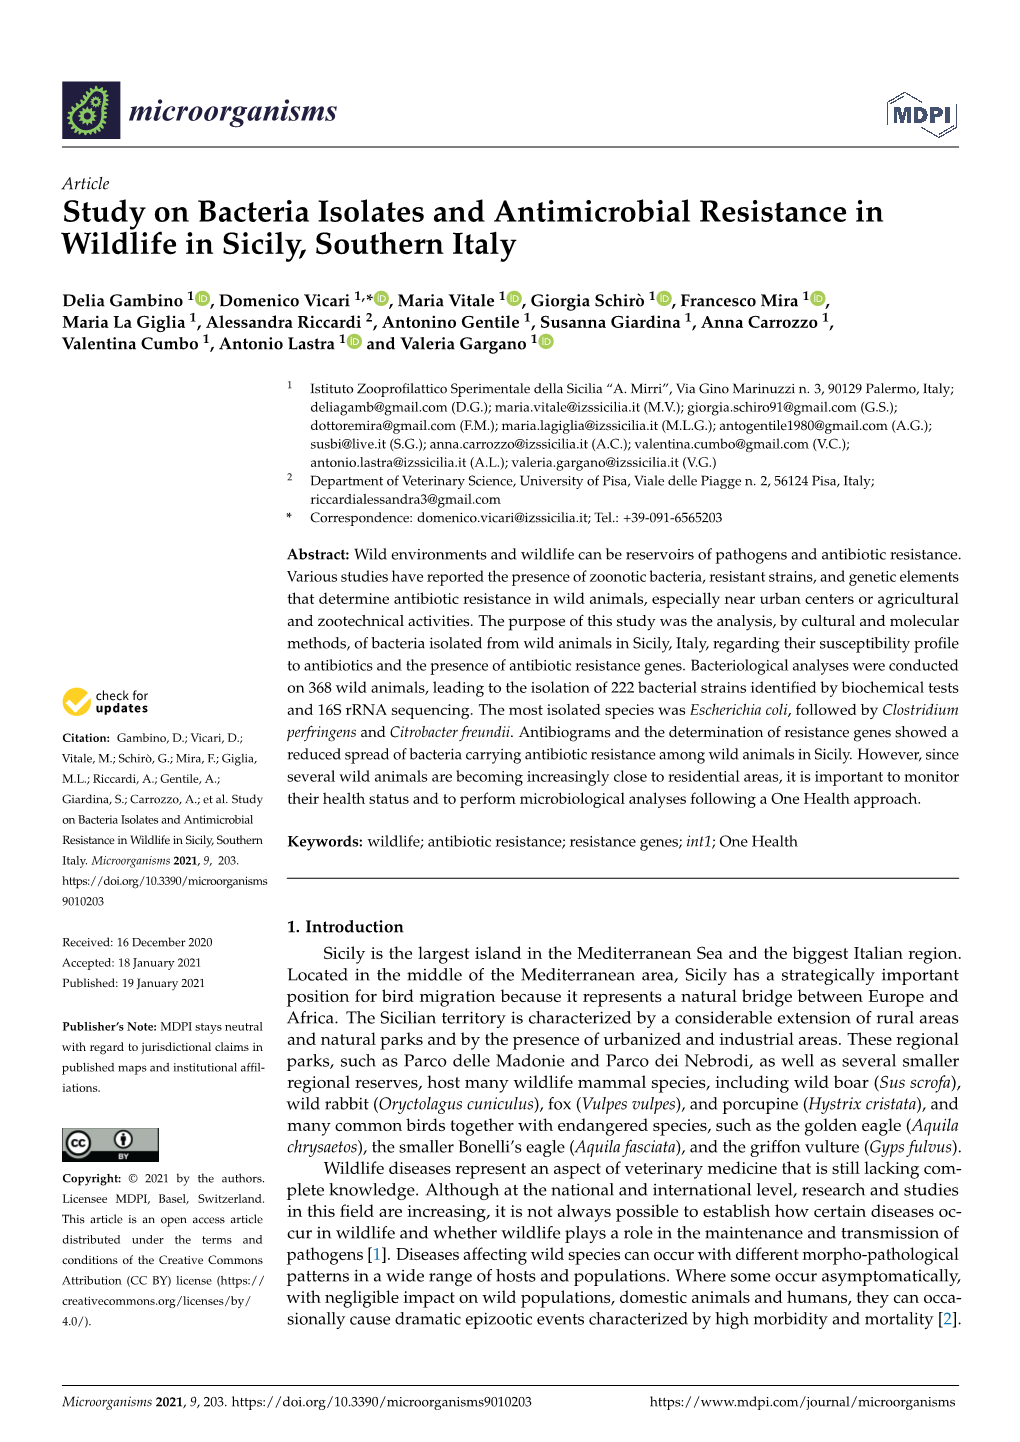 Study on Bacteria Isolates and Antimicrobial Resistance in Wildlife in Sicily, Southern Italy